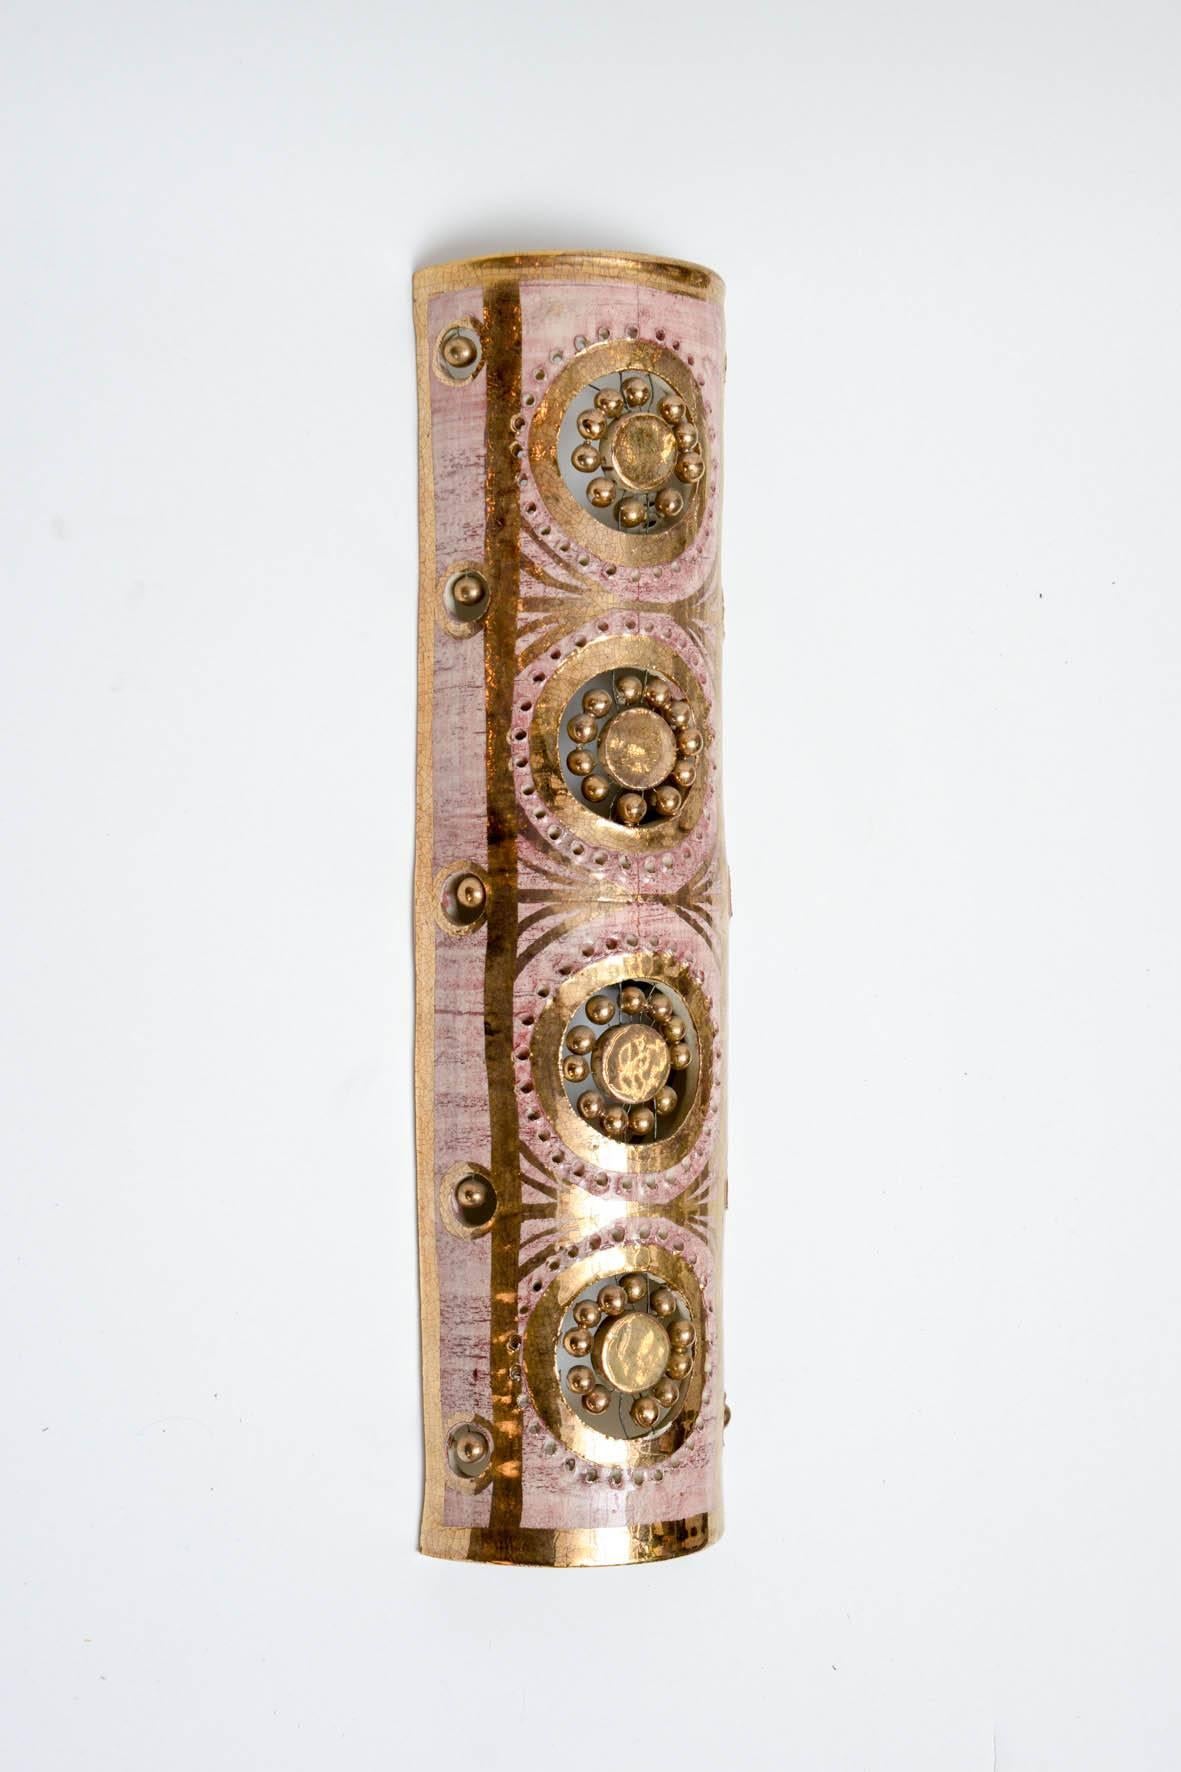 Pair of wall sconces by Georges Pelletier.

Made of pink and gold glaze ceramic in the pure style of the artist.